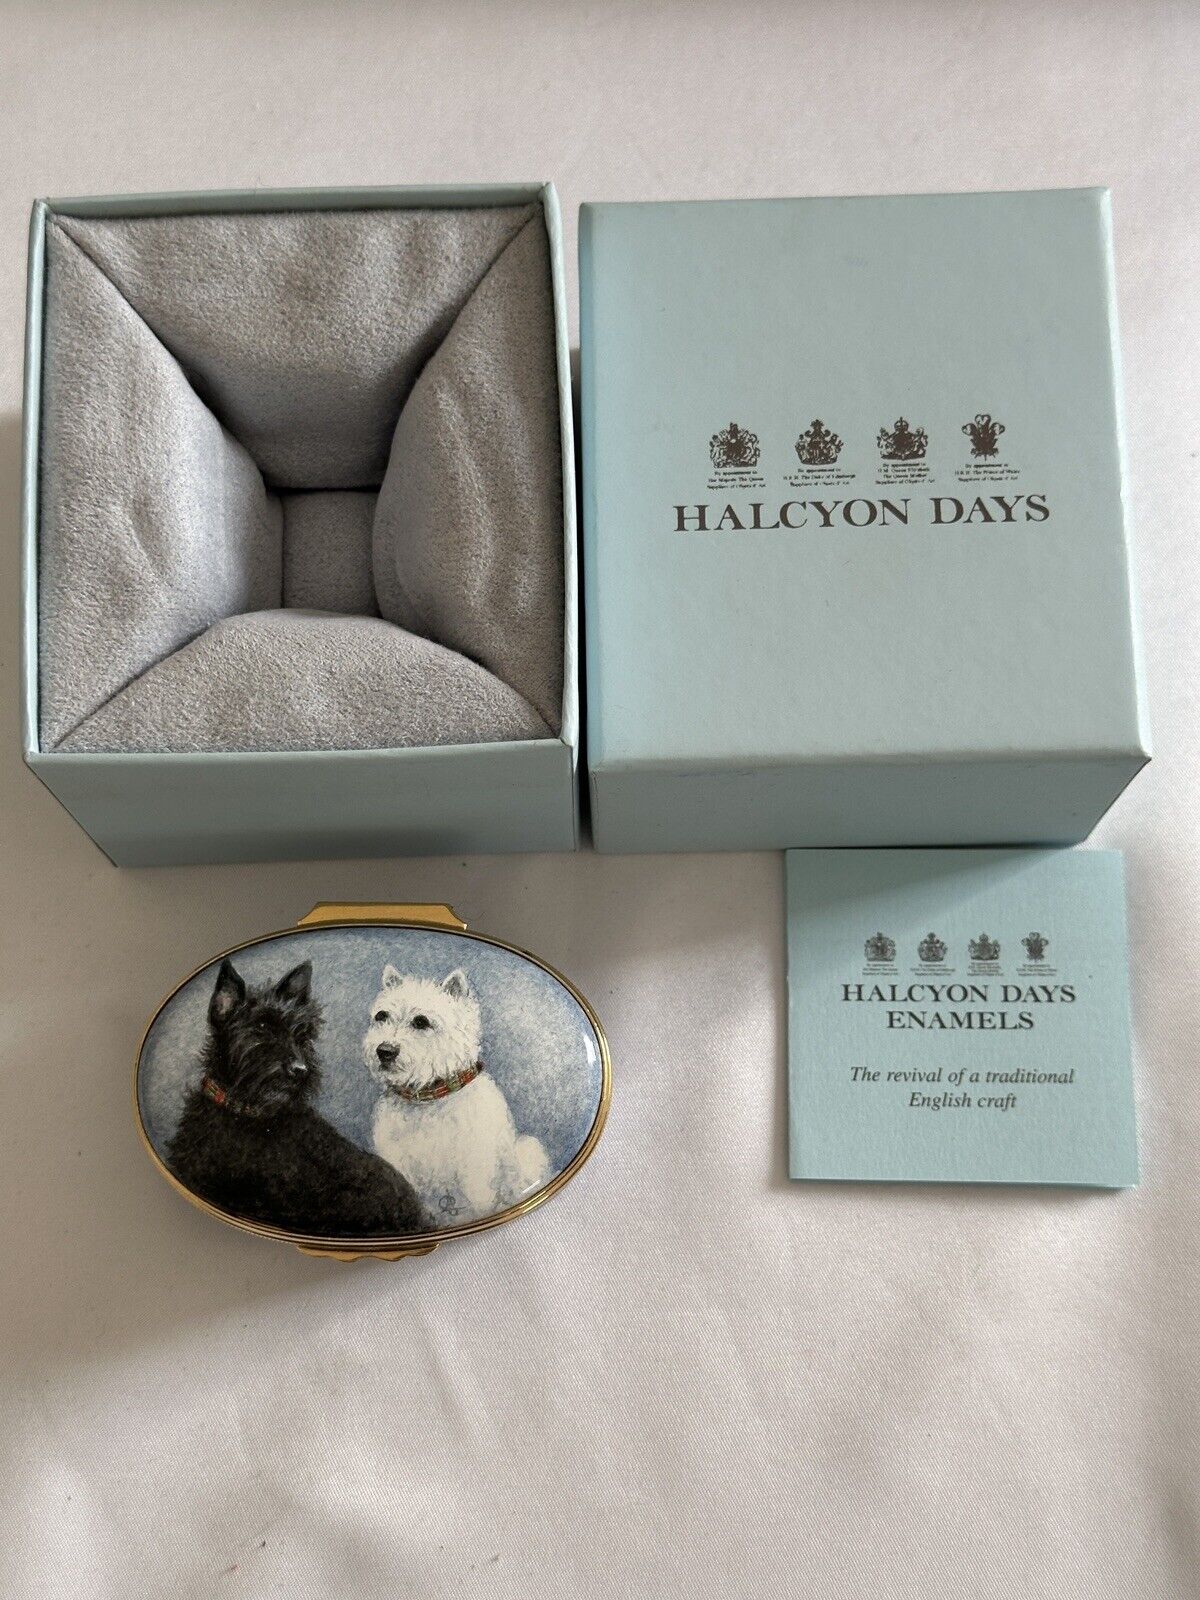 Rare halcyon days enamel box dogs Inky And Scooter Blue Enamel Gold Rim With Box